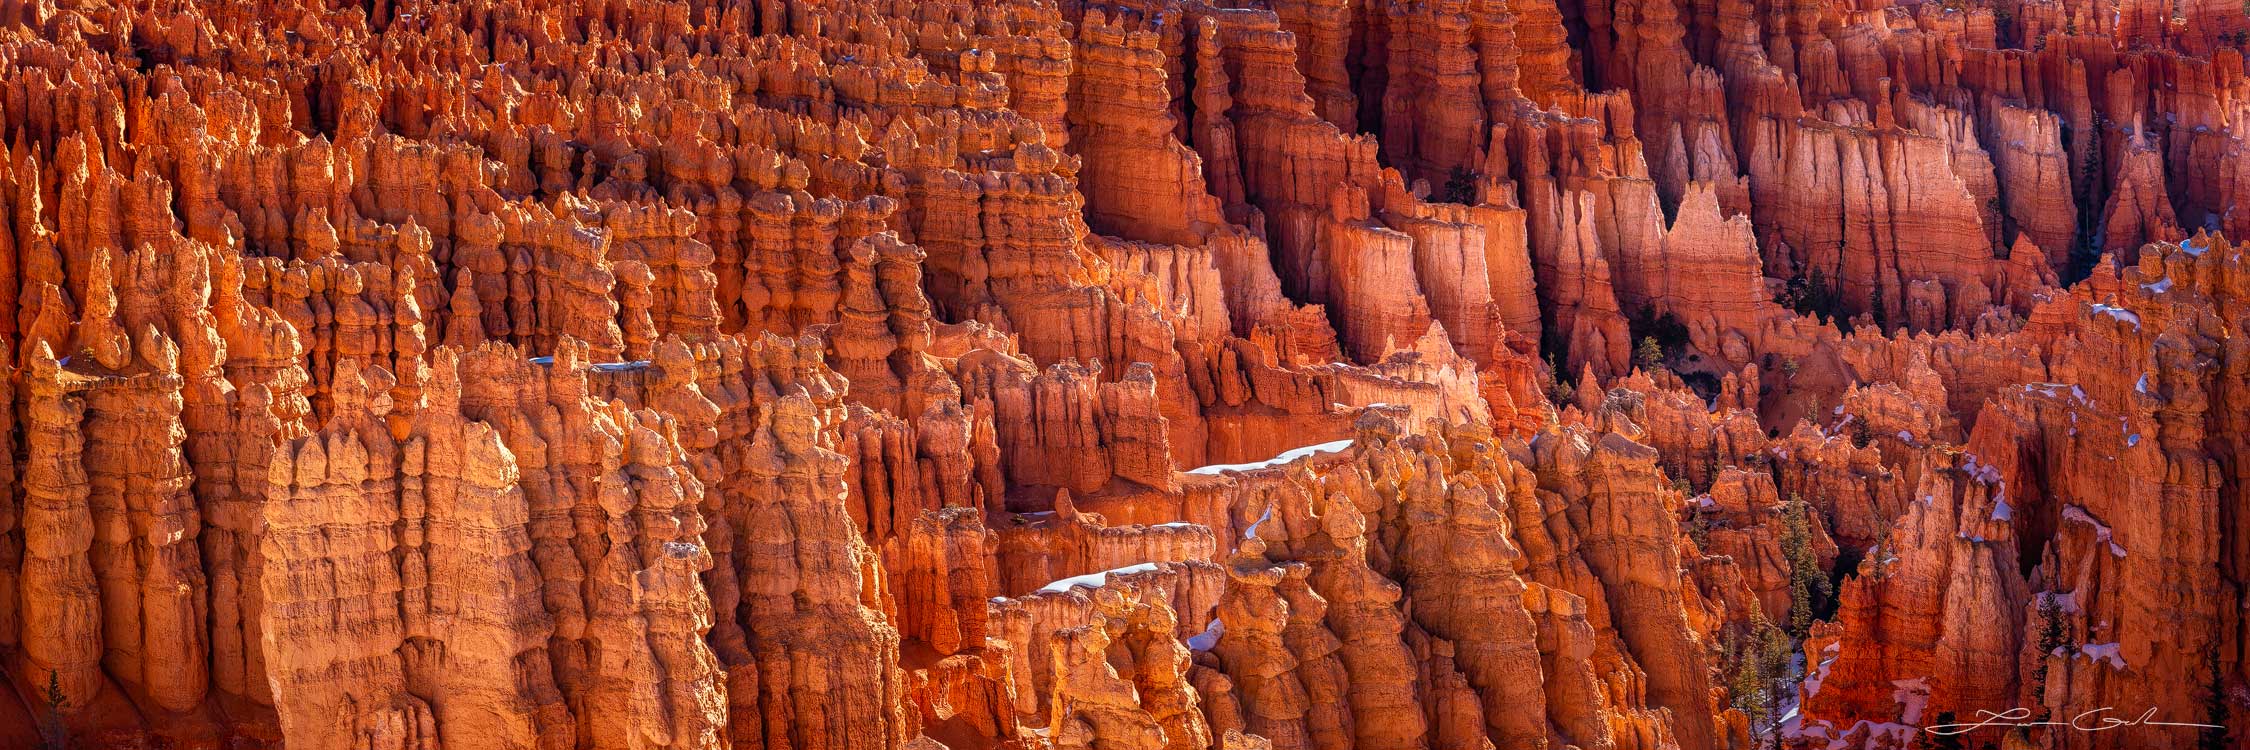 A panorama of sandstone hoodoo spires rich in red and orange color, Bryce Canyon